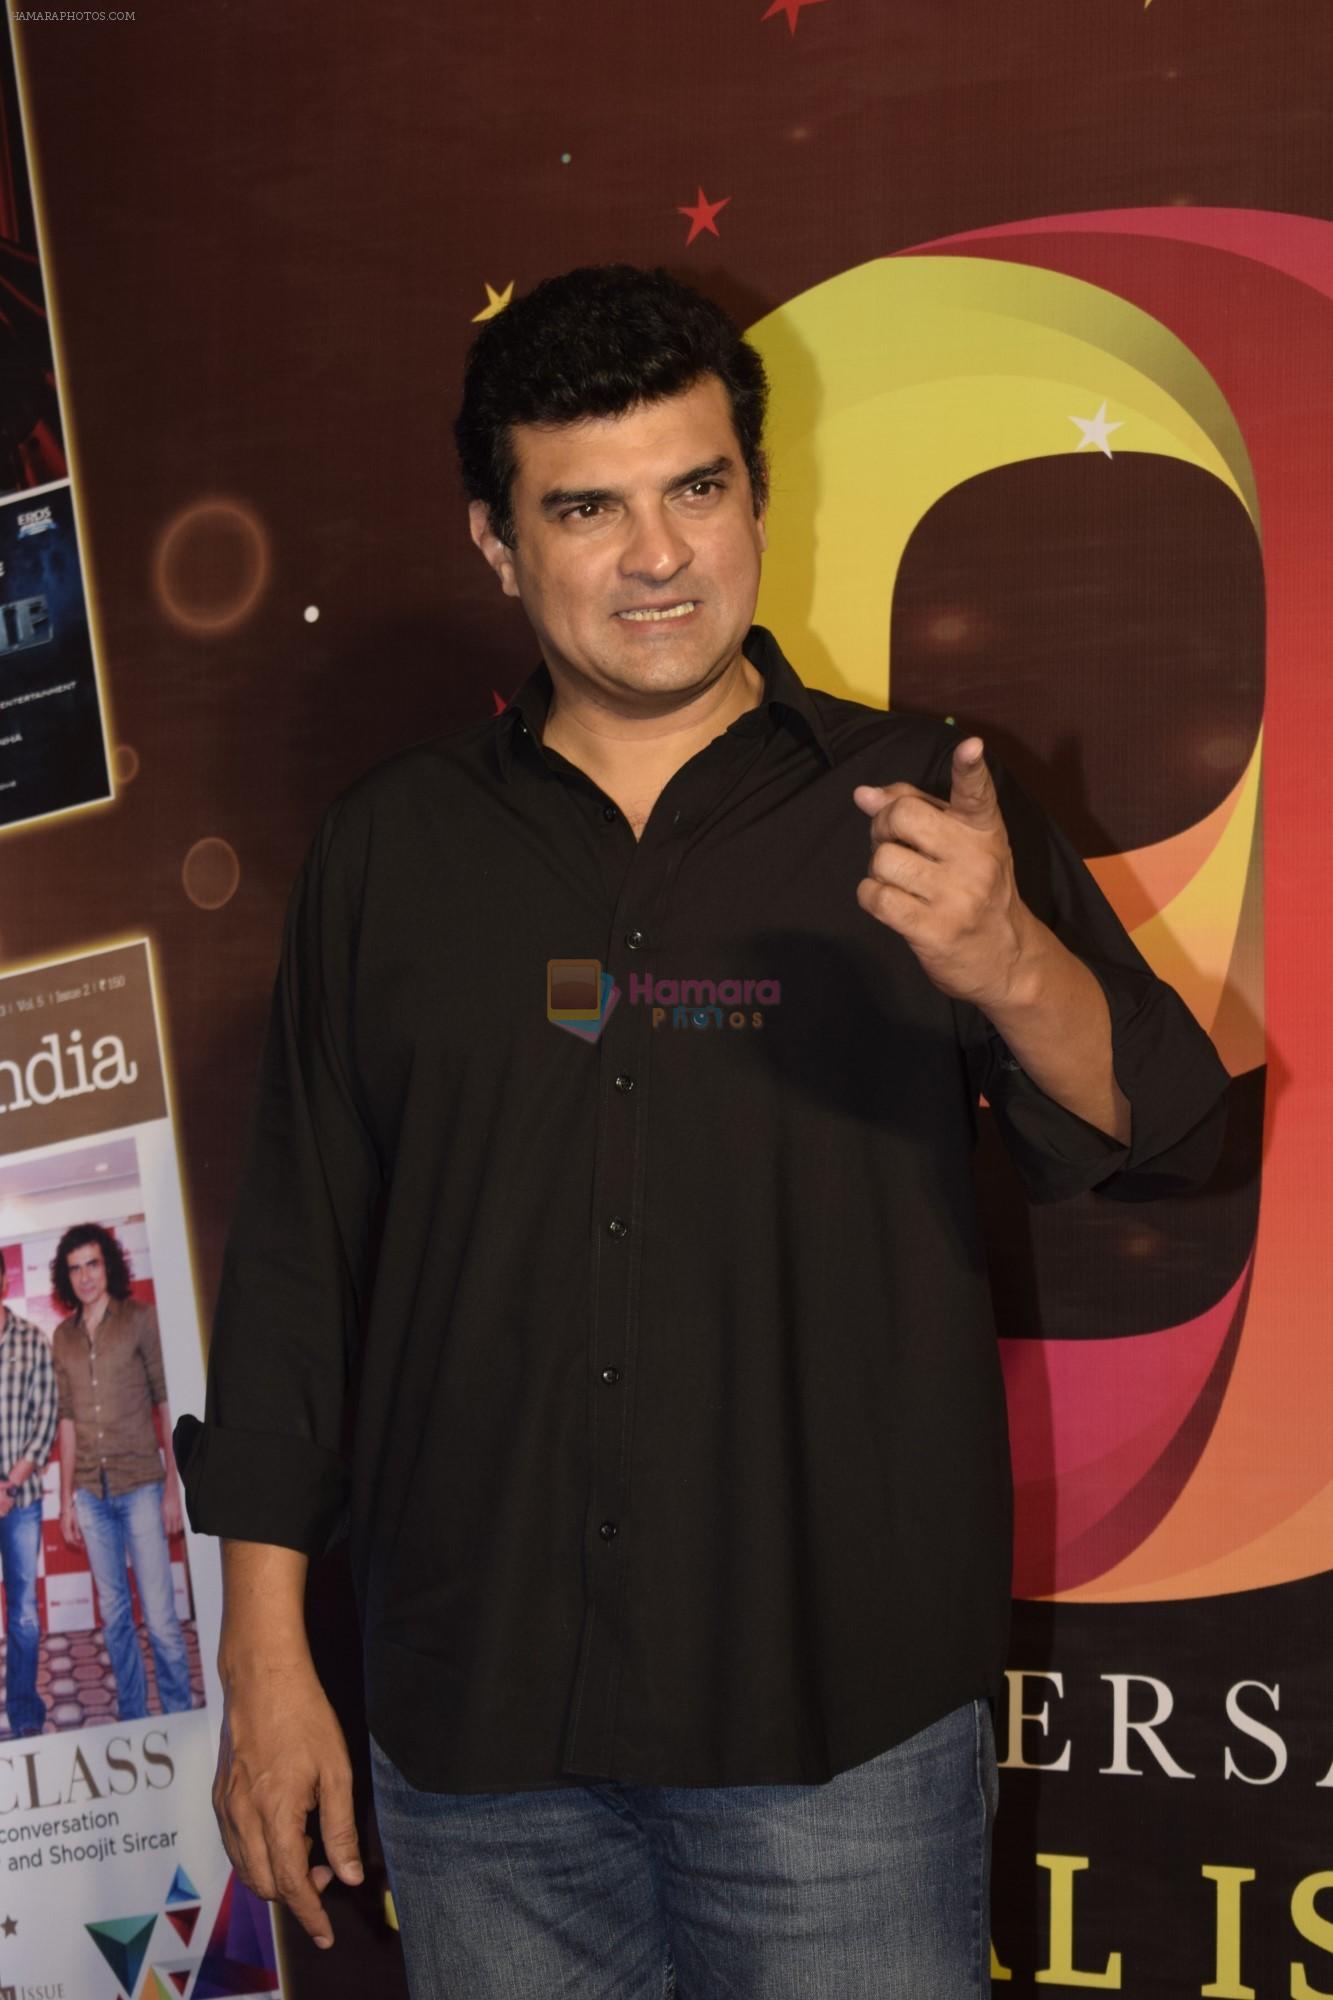 Siddharth Roy Kapoor at the 9th anniversary cover launch of Boxoffice India magazine in Novotel juhu on 24th Sept 2018